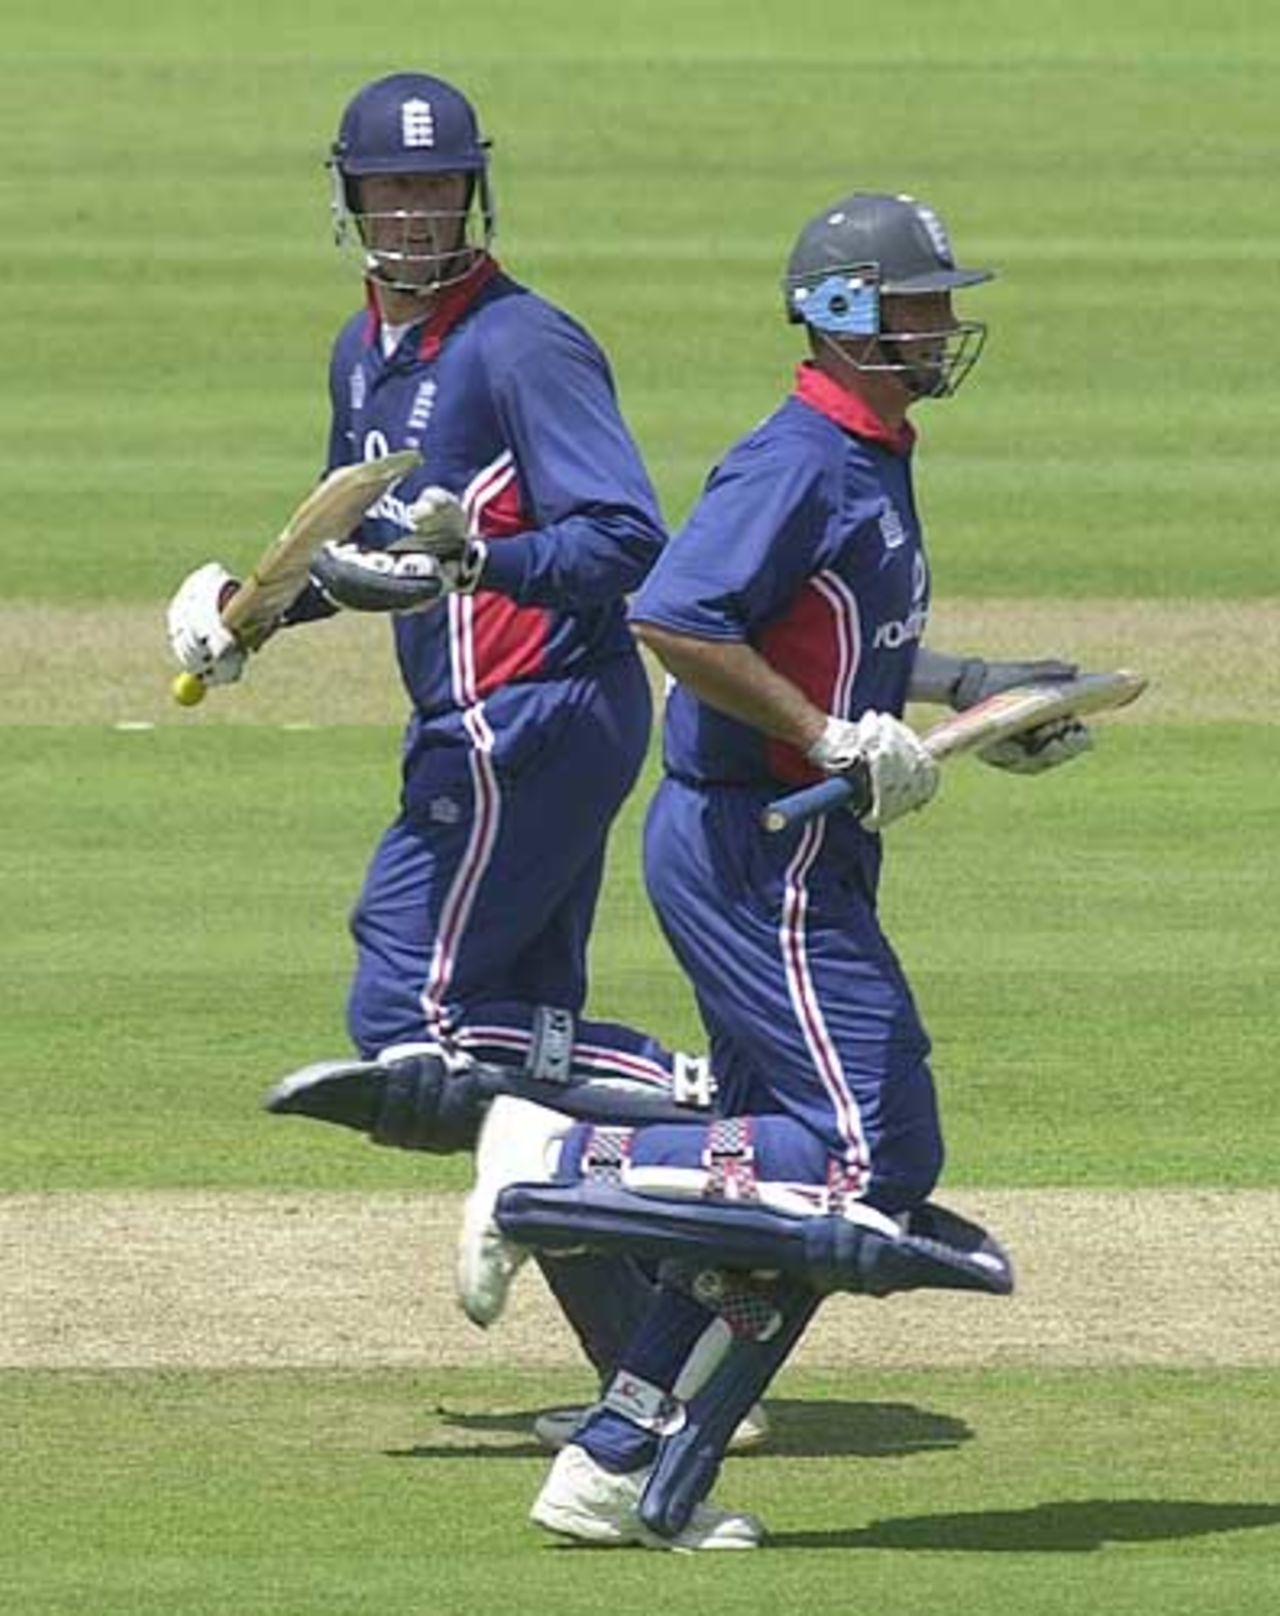 Trescothick and Hussain pile up the runs in a partnership of 181, NatWest Series Final, 13th July 2002